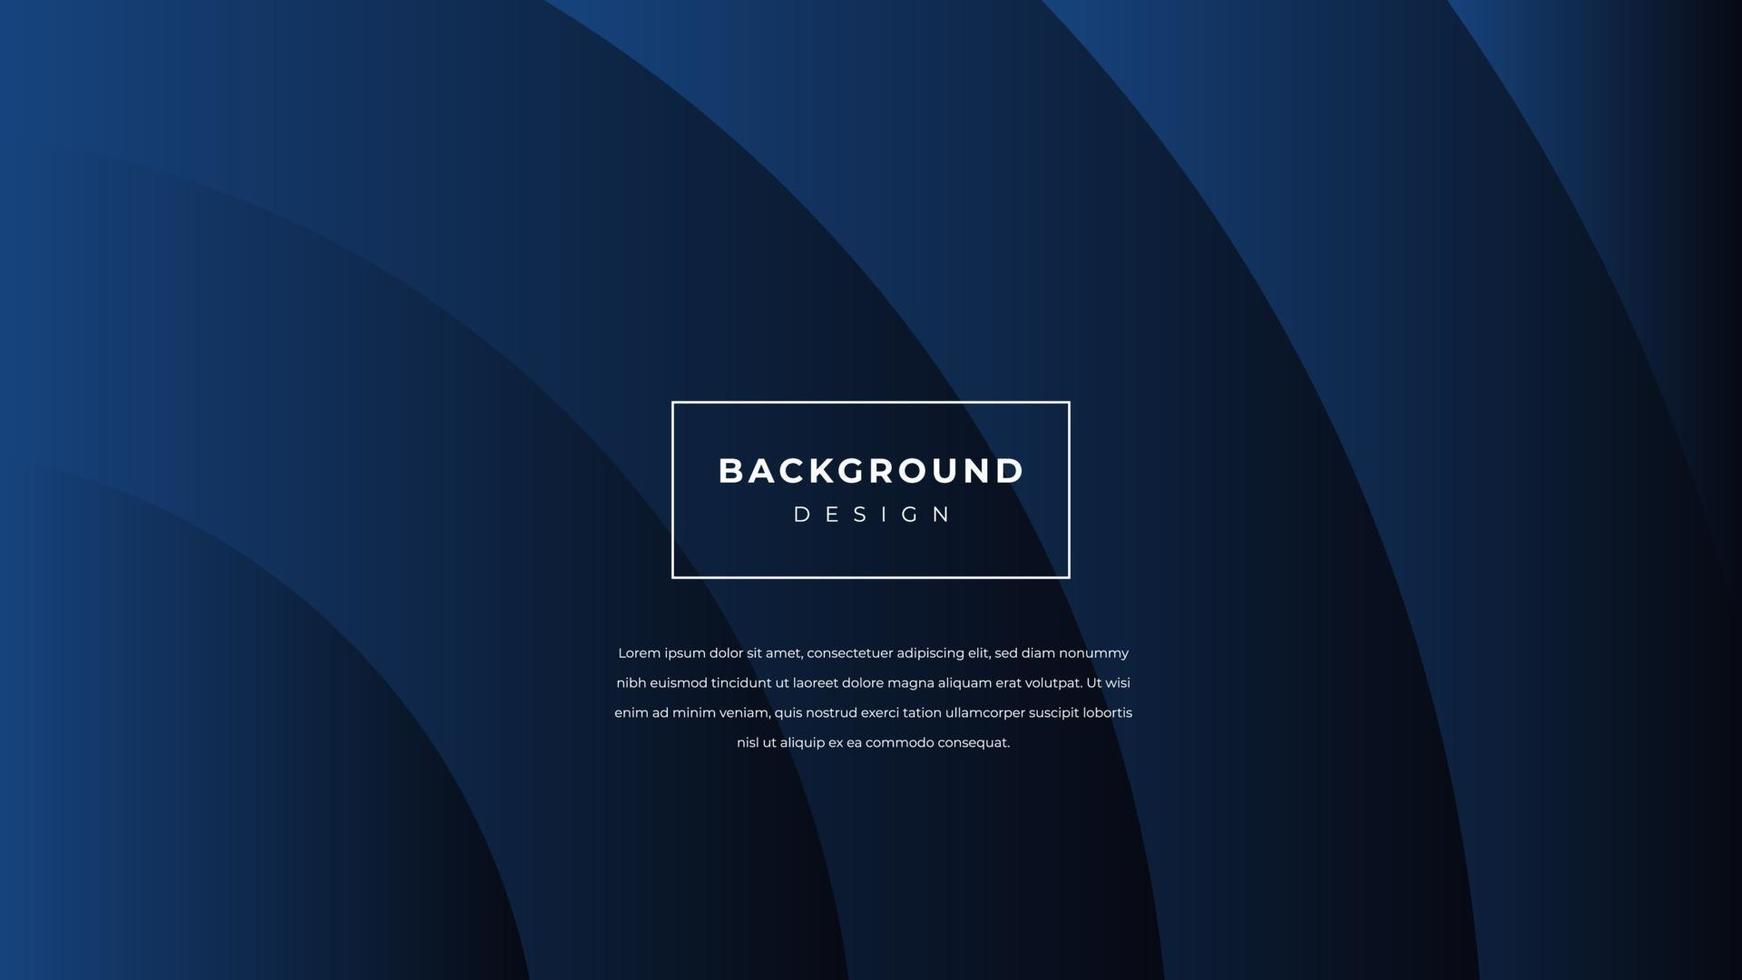 abstract background blue phantom. Trendy wave shapes composition. Vector illustration eps10.